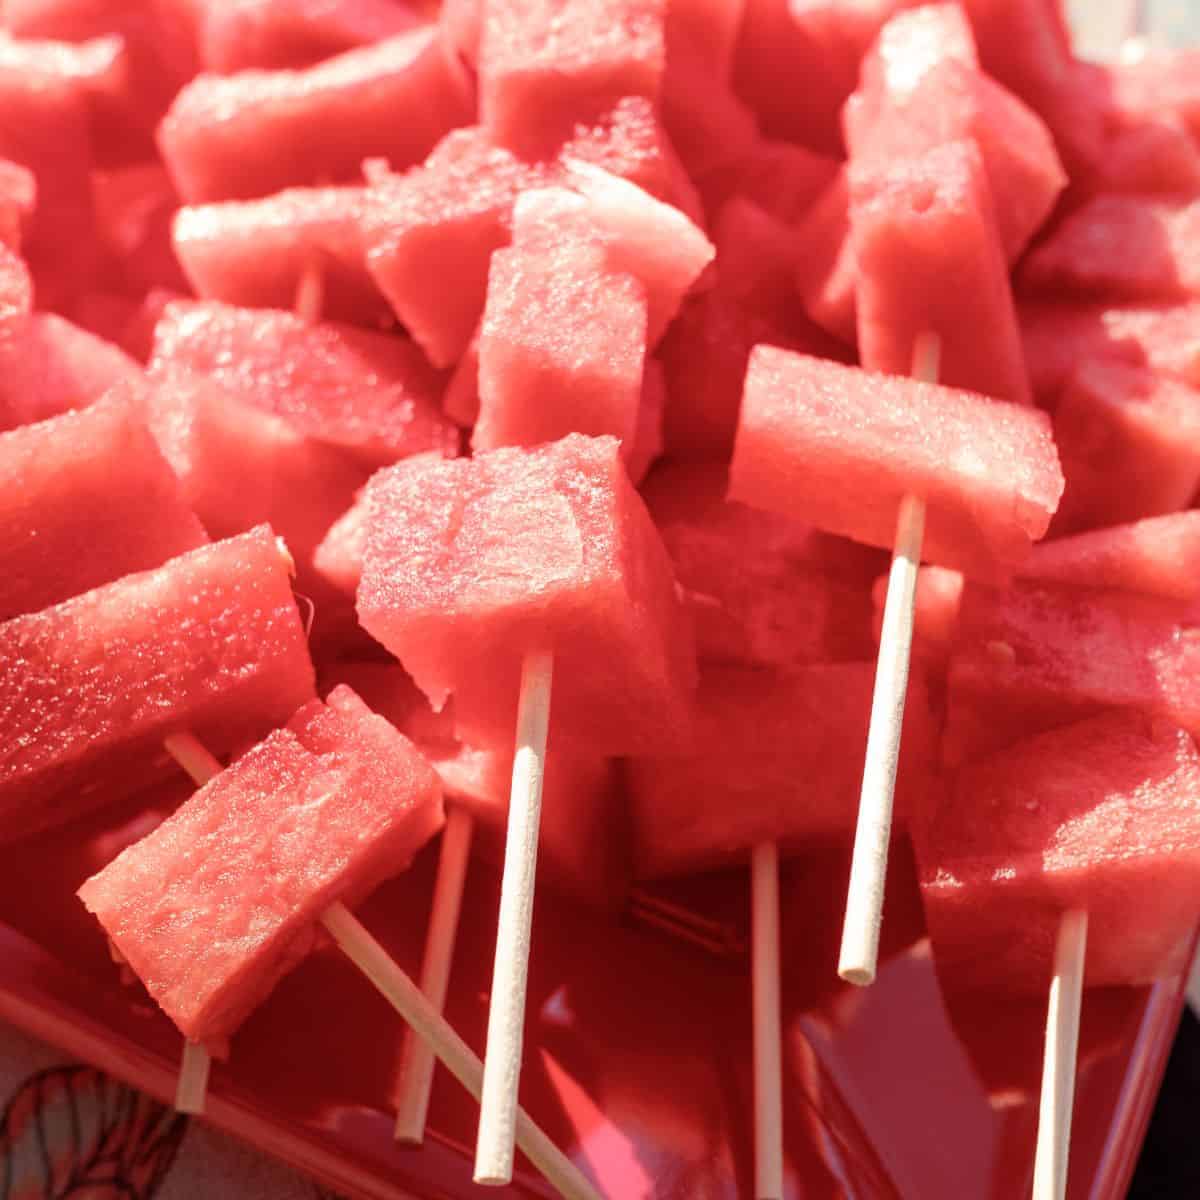 Discover the benefits of watermelon for kids and 7 fun and easy ways to serve watermelon to kids that will have them gobbling it up! 